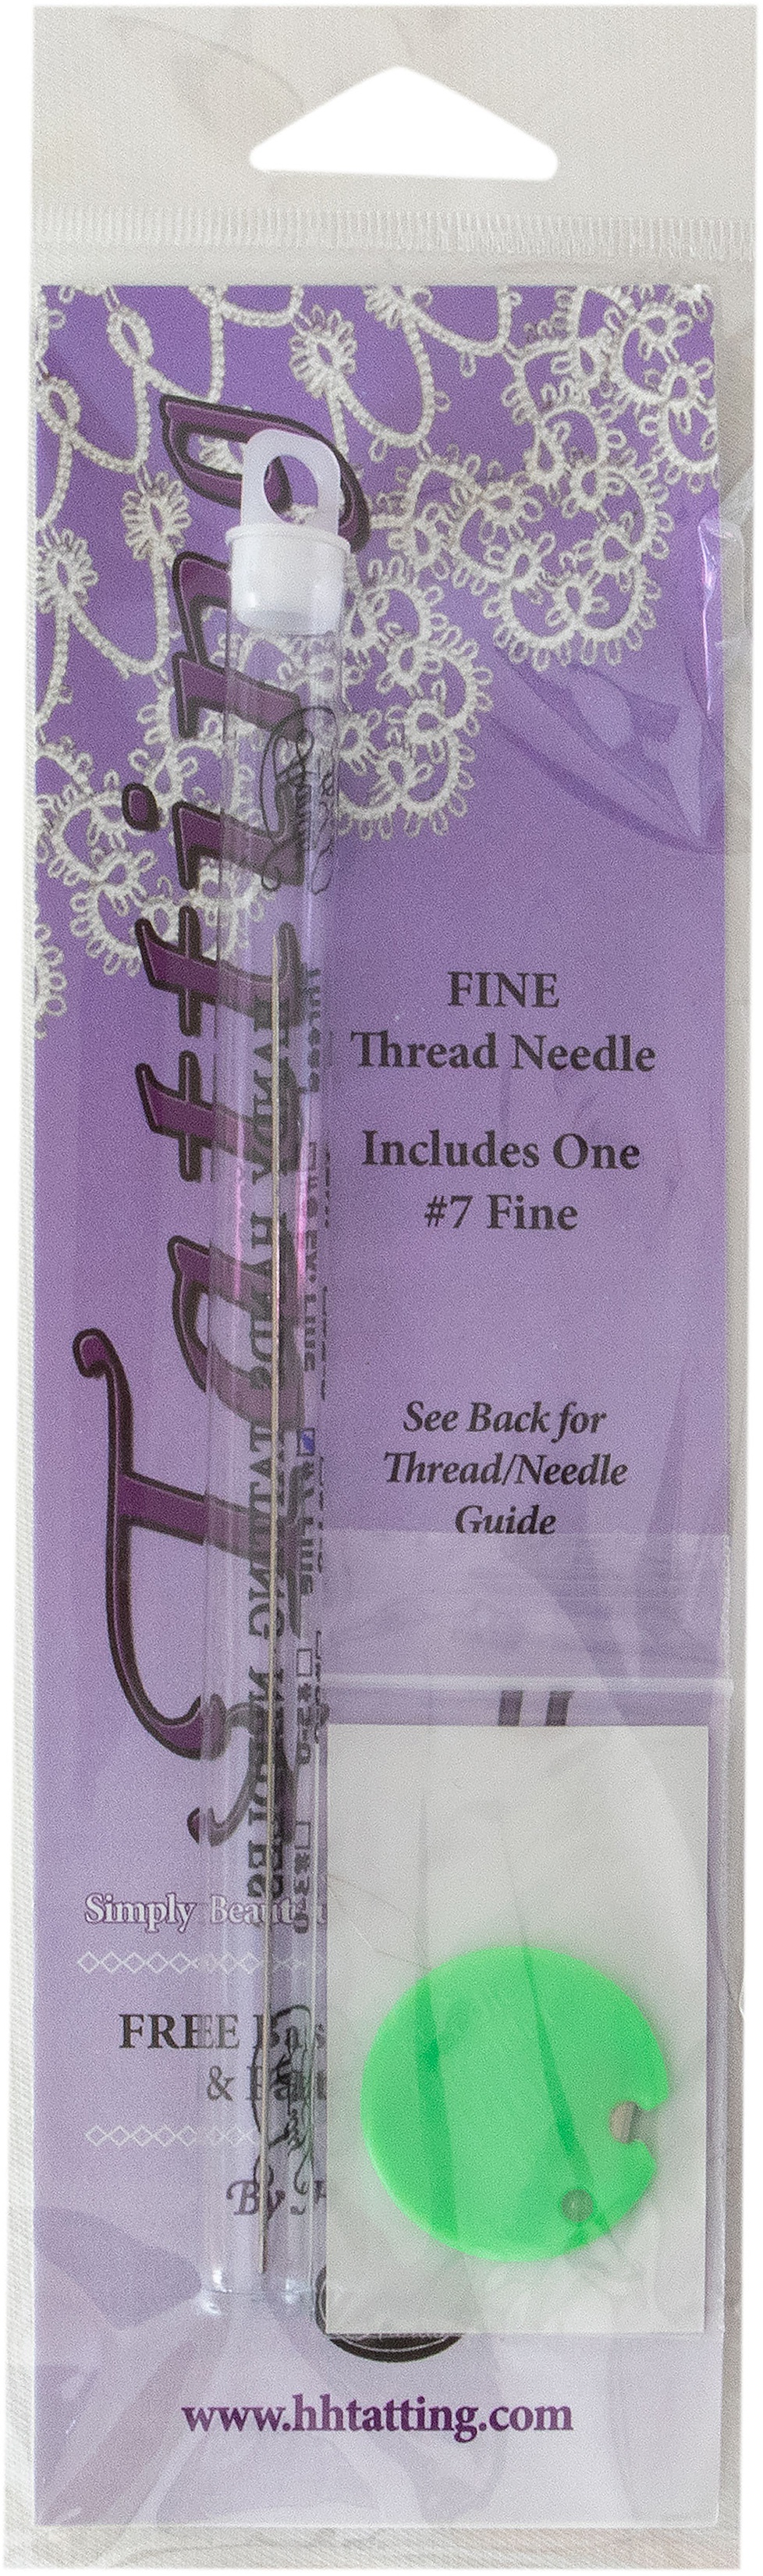 Handy Hands-Handy Hands Limited time trial price Tatting Fine Needle Selling rankings For Thread-#7